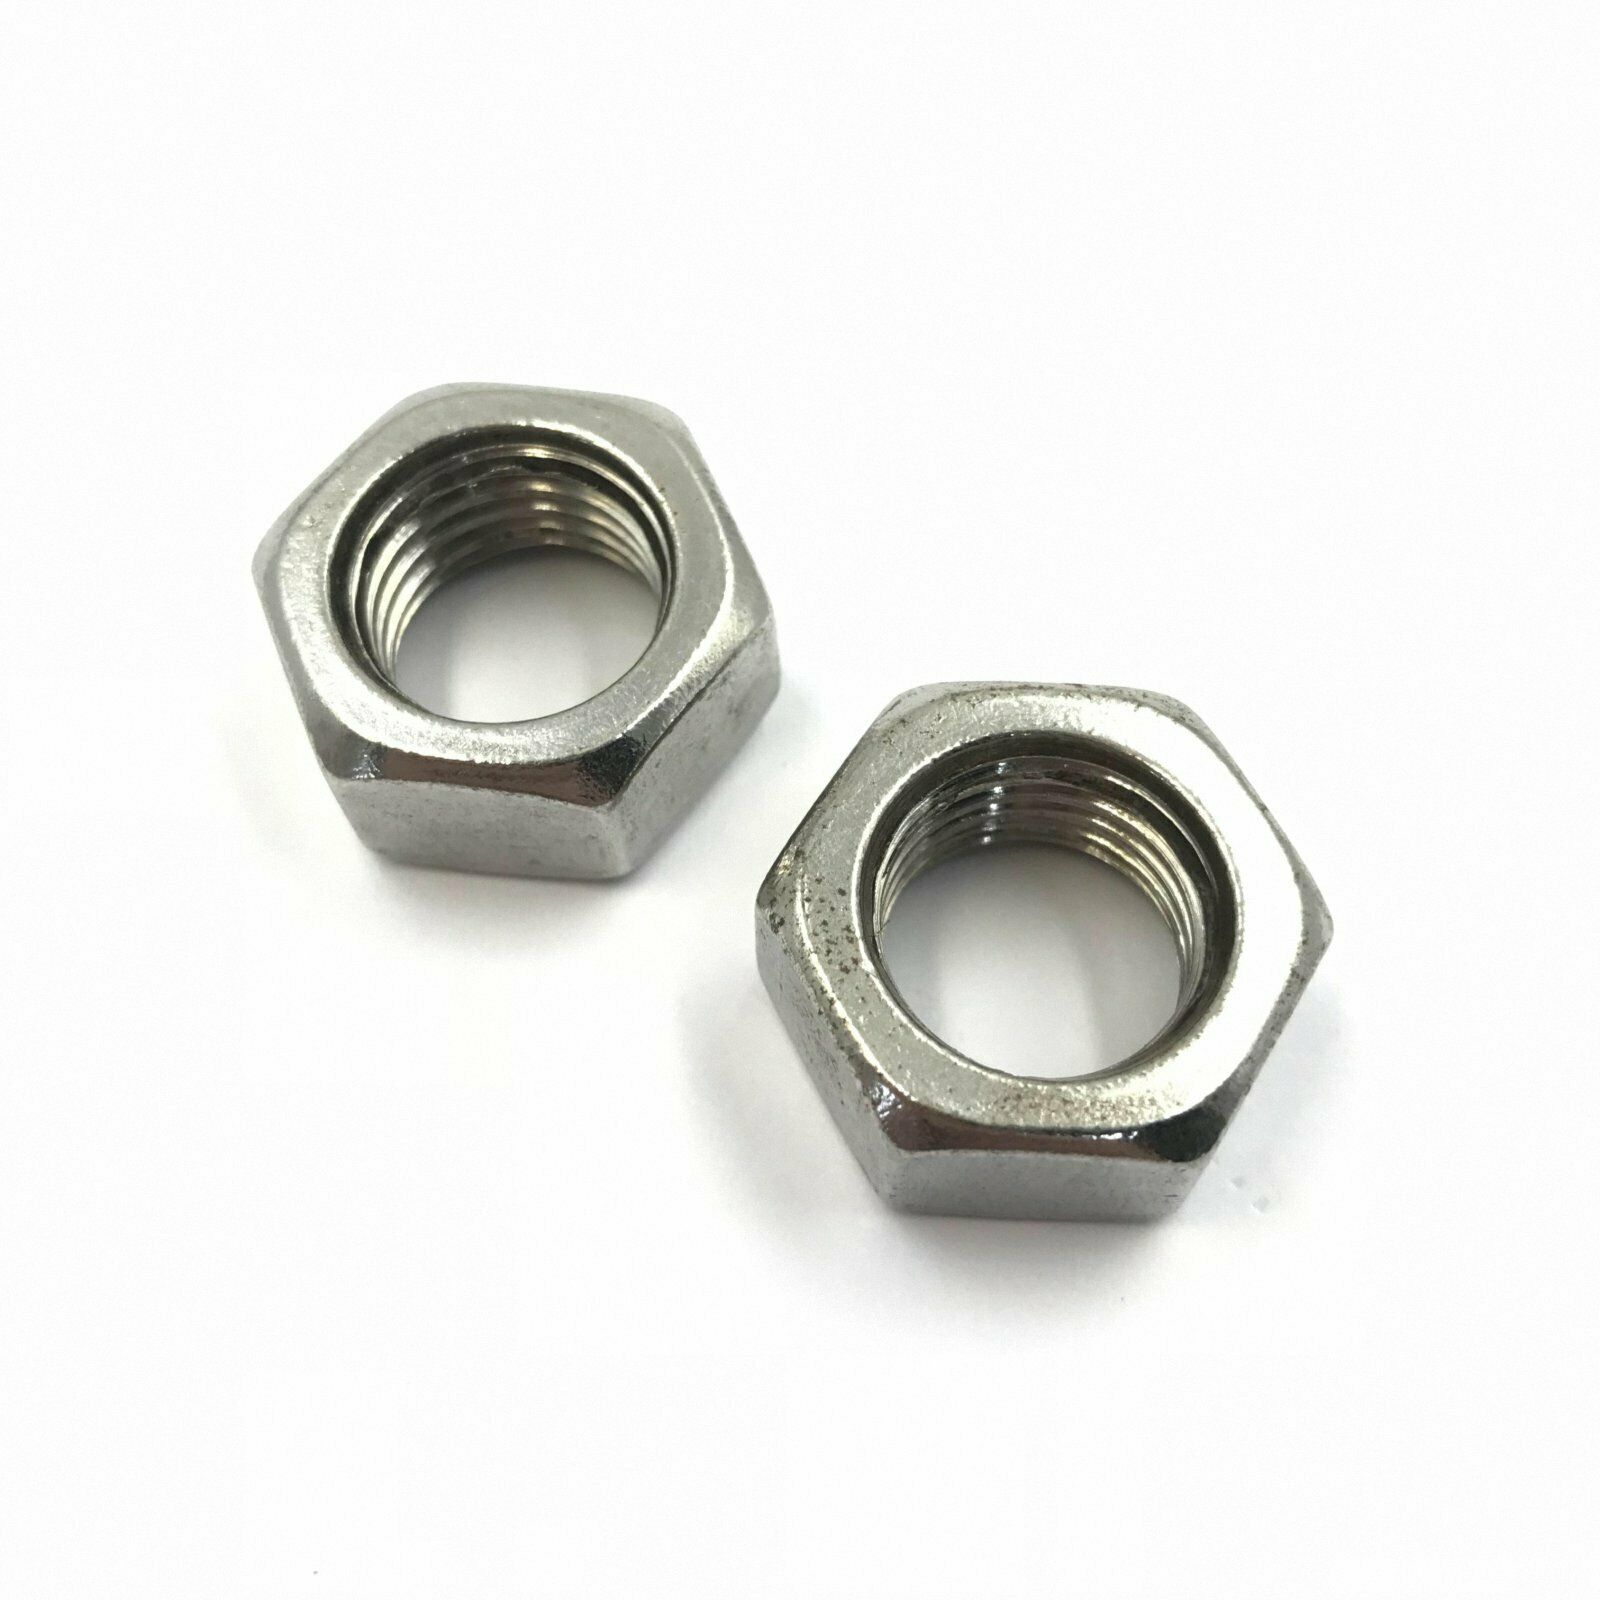 New 2Pcs M10 x 1.5 Metric Left Hand Thread Stainless Steel Hex Nut [M1]